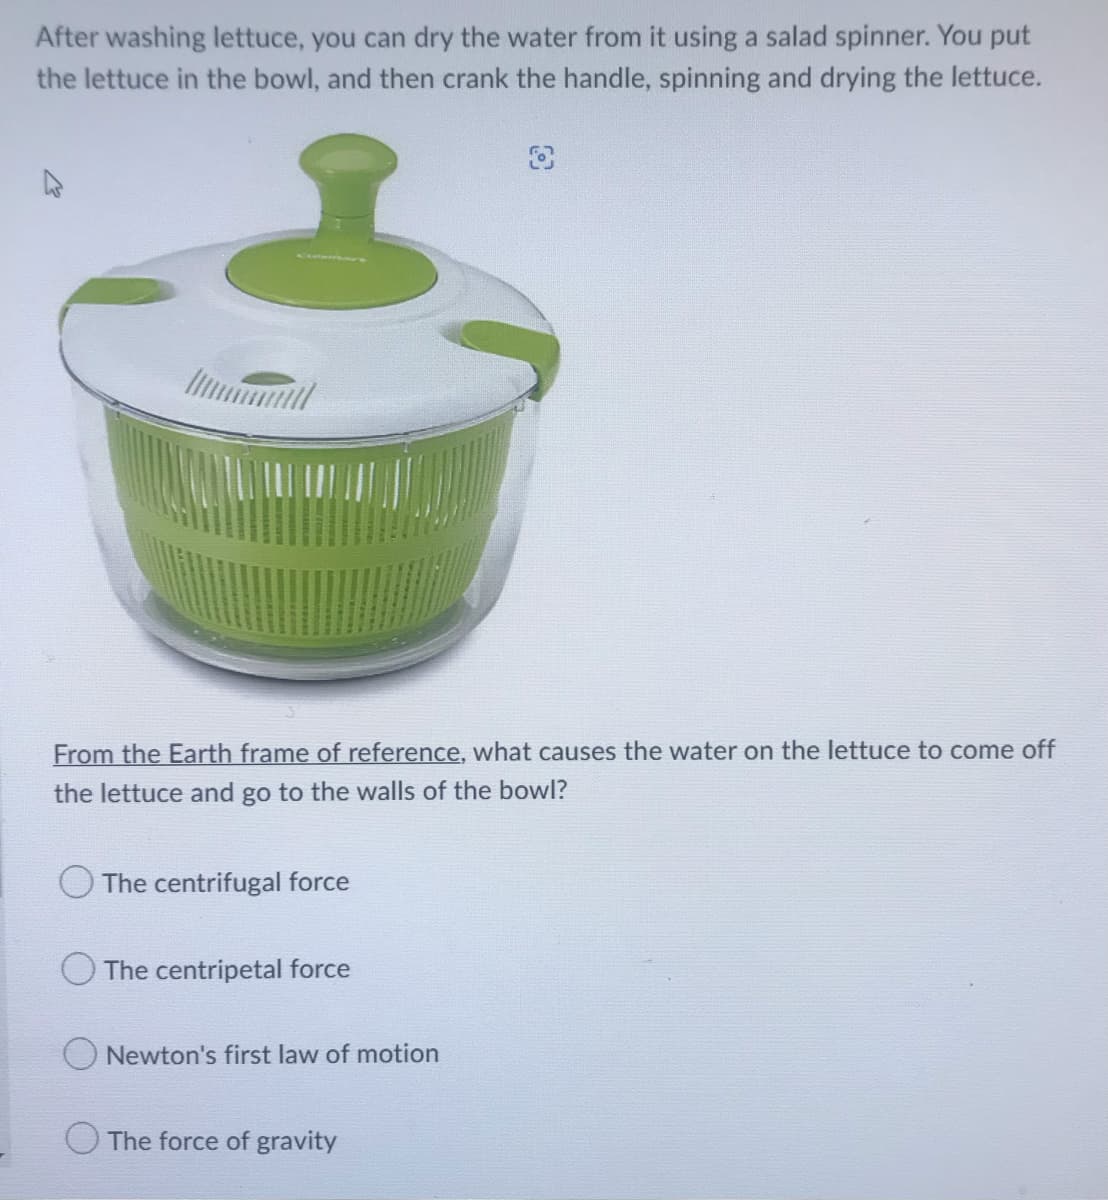 After washing lettuce, you can dry the water from it using a salad spinner. You put
the lettuce in the bowl, and then crank the handle, spinning and drying the lettuce.
From the Earth frame of reference, what causes the water on the lettuce to come off
the lettuce and go to the walls of the bowl?
The centrifugal force
The centripetal force
Newton's first law of motion
The force of gravity